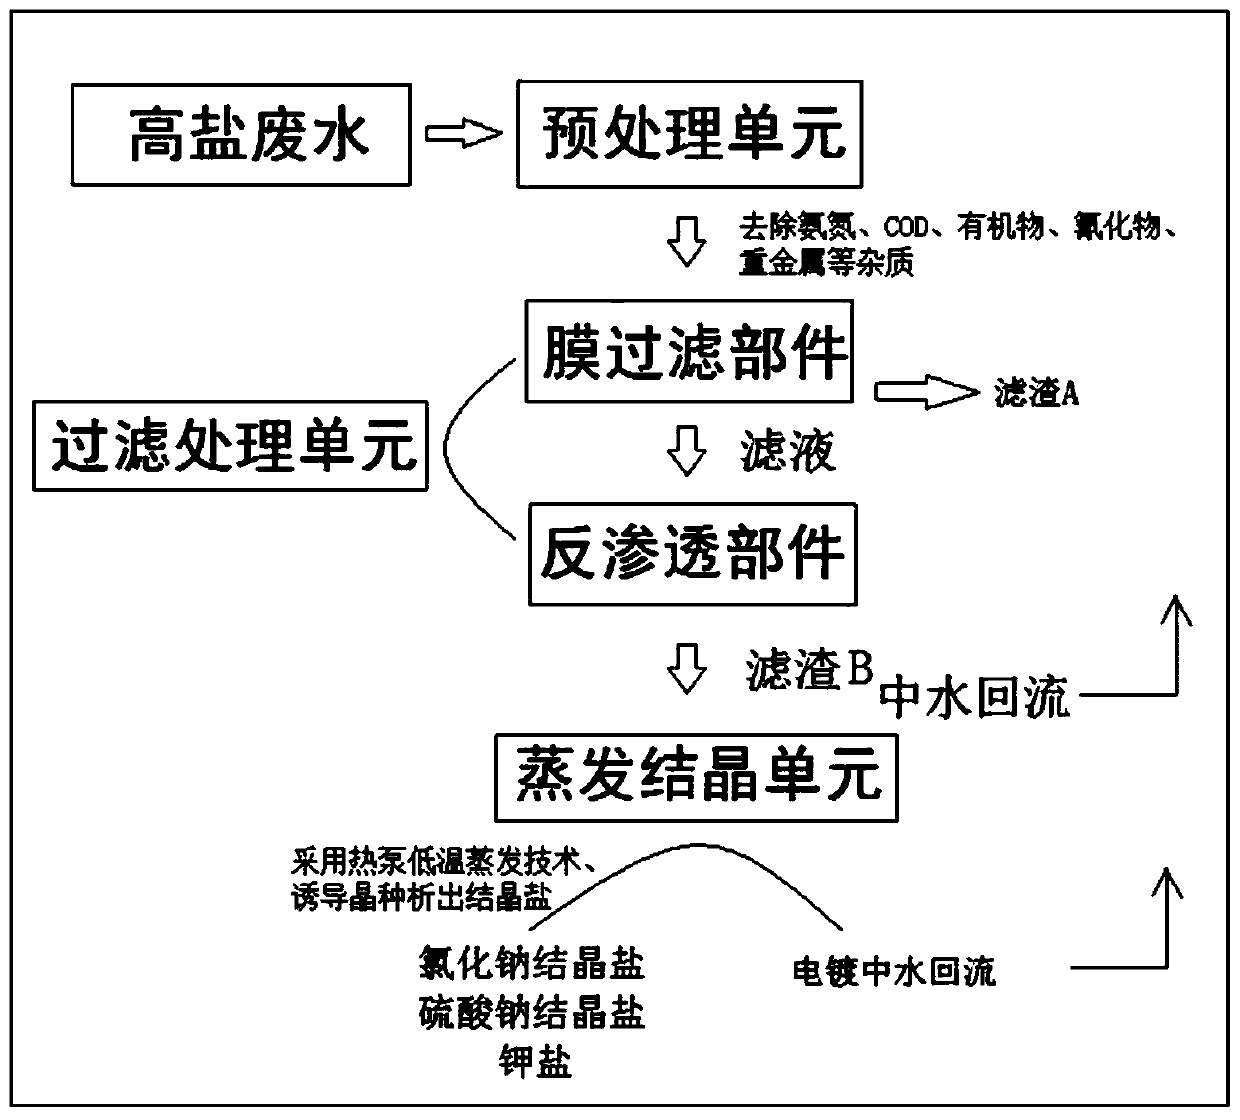 System and treatment process for purification and salt separation of electroplating high-salt wastewater